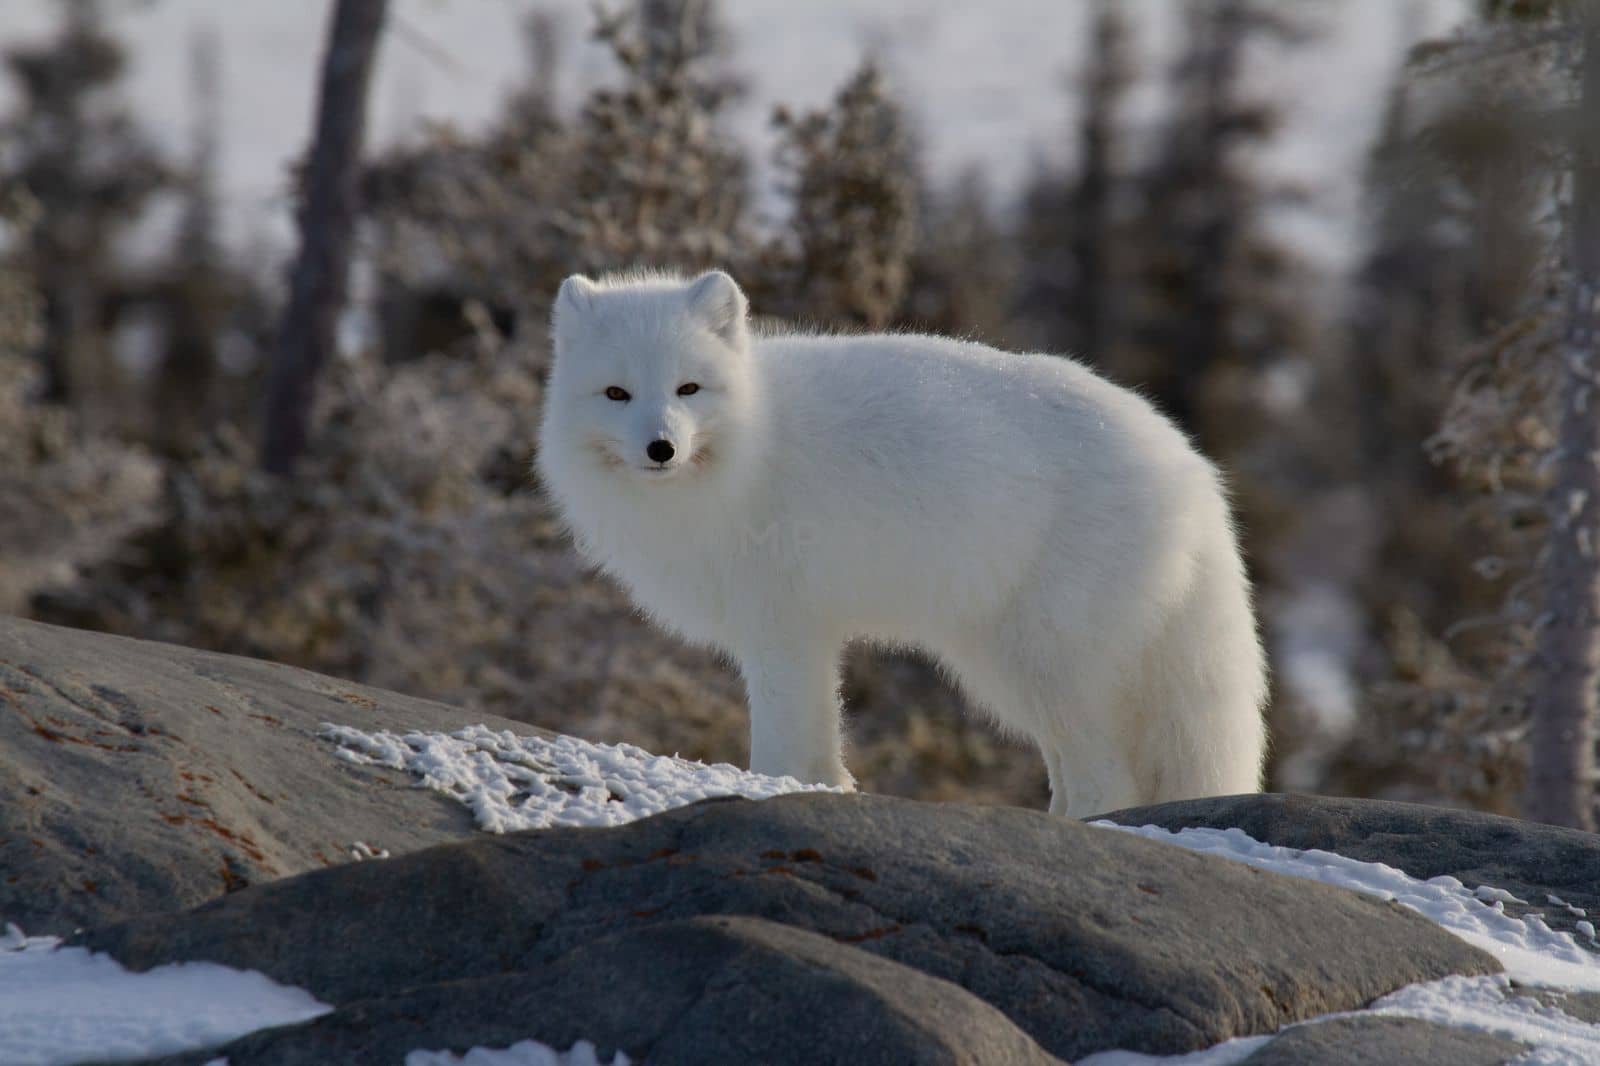 Arctic fox or Vulpes Lagopus in white winter coat with trees in the background looking at the camera, Churchill, Manitoba, Canada